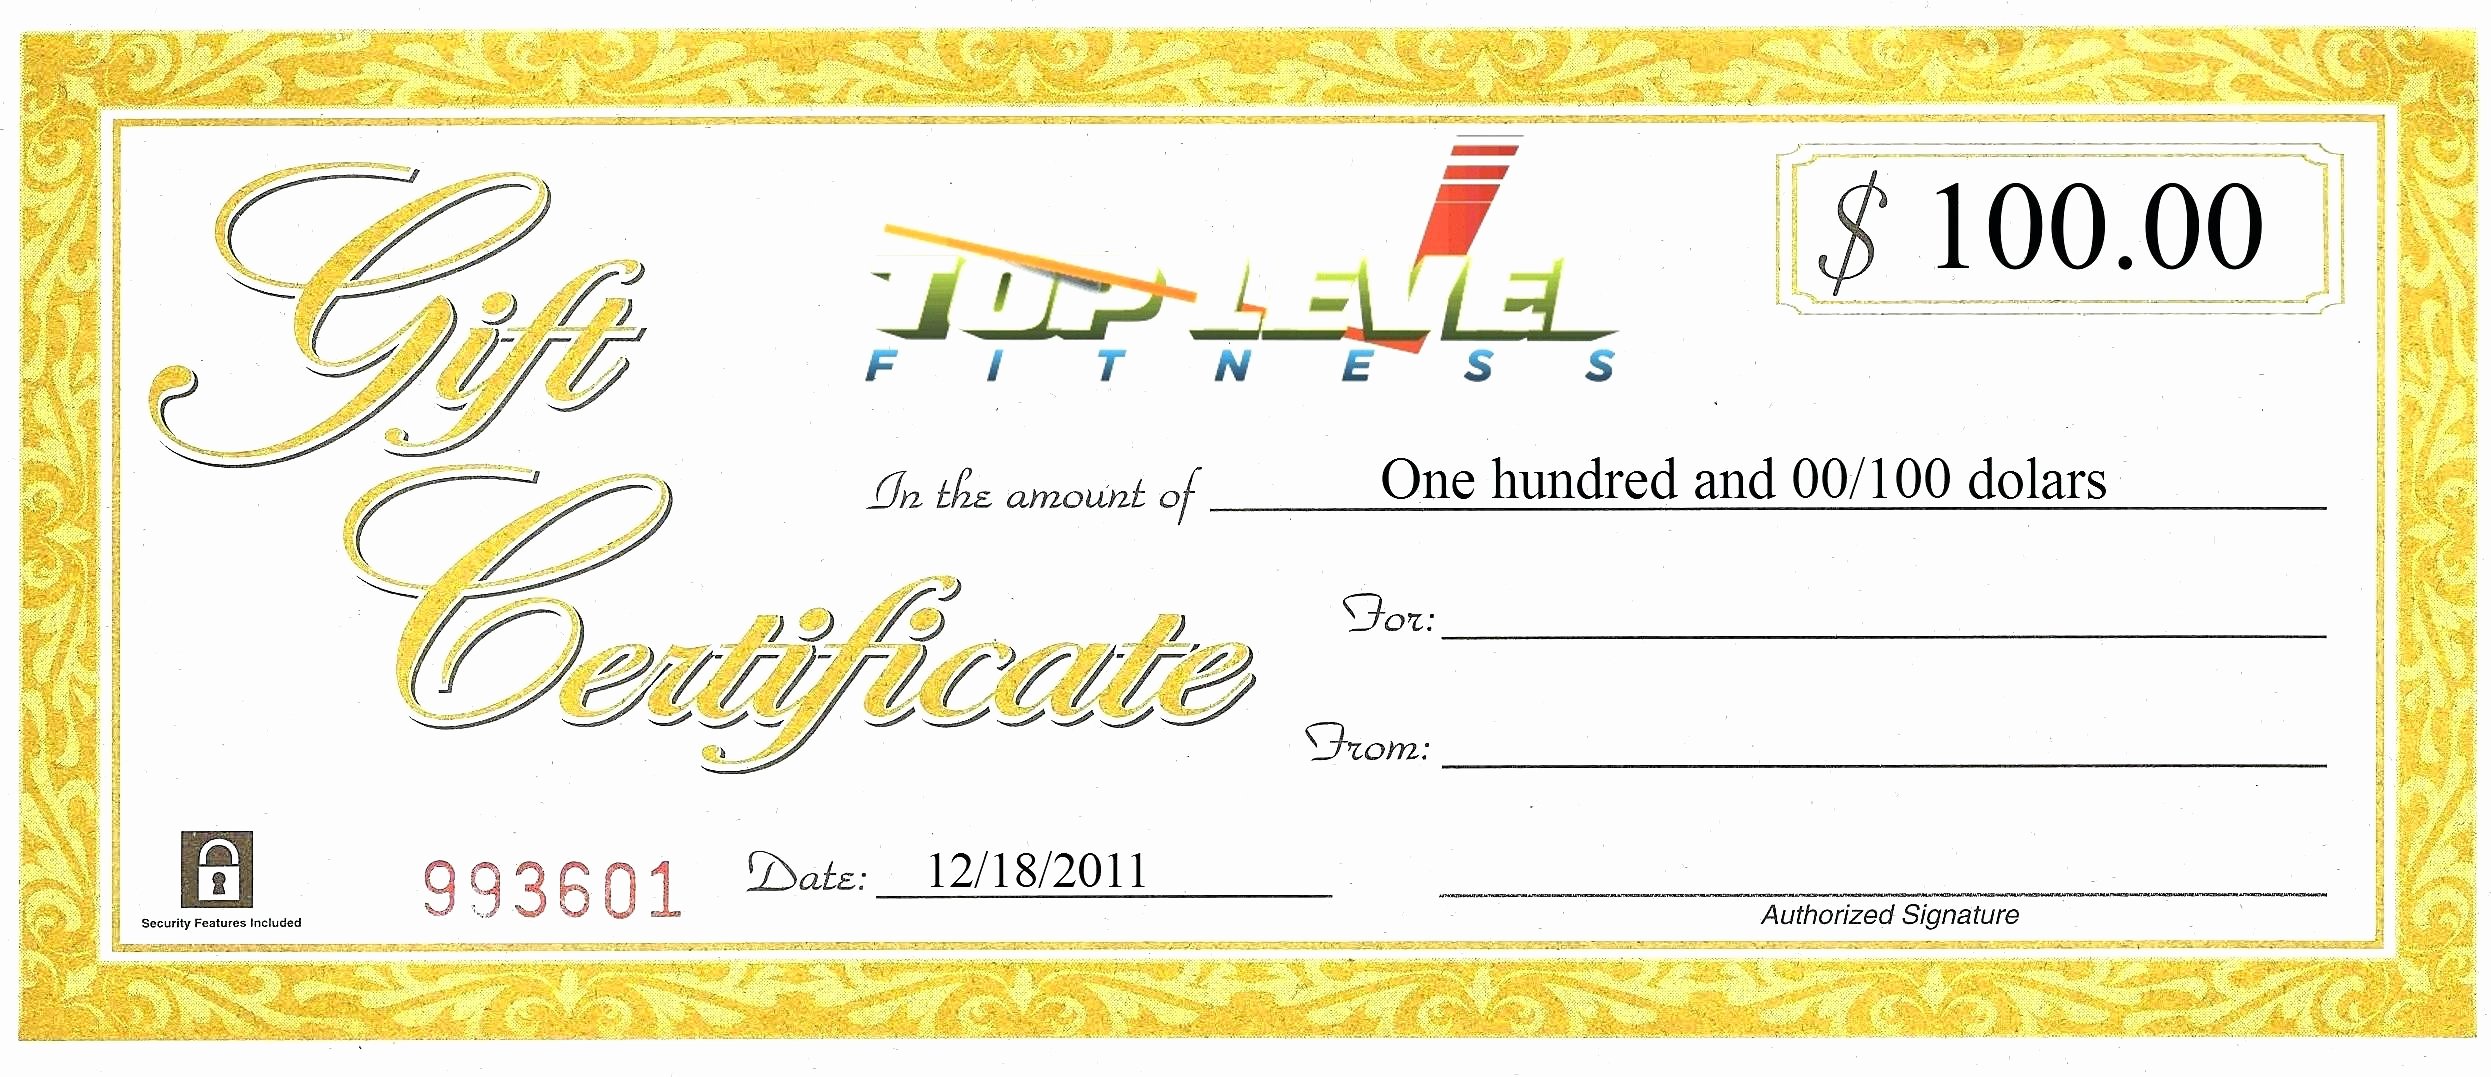 Car Wash Gift Certificate Template Awesome Car Gift Certificate Template Car Detailing Price List